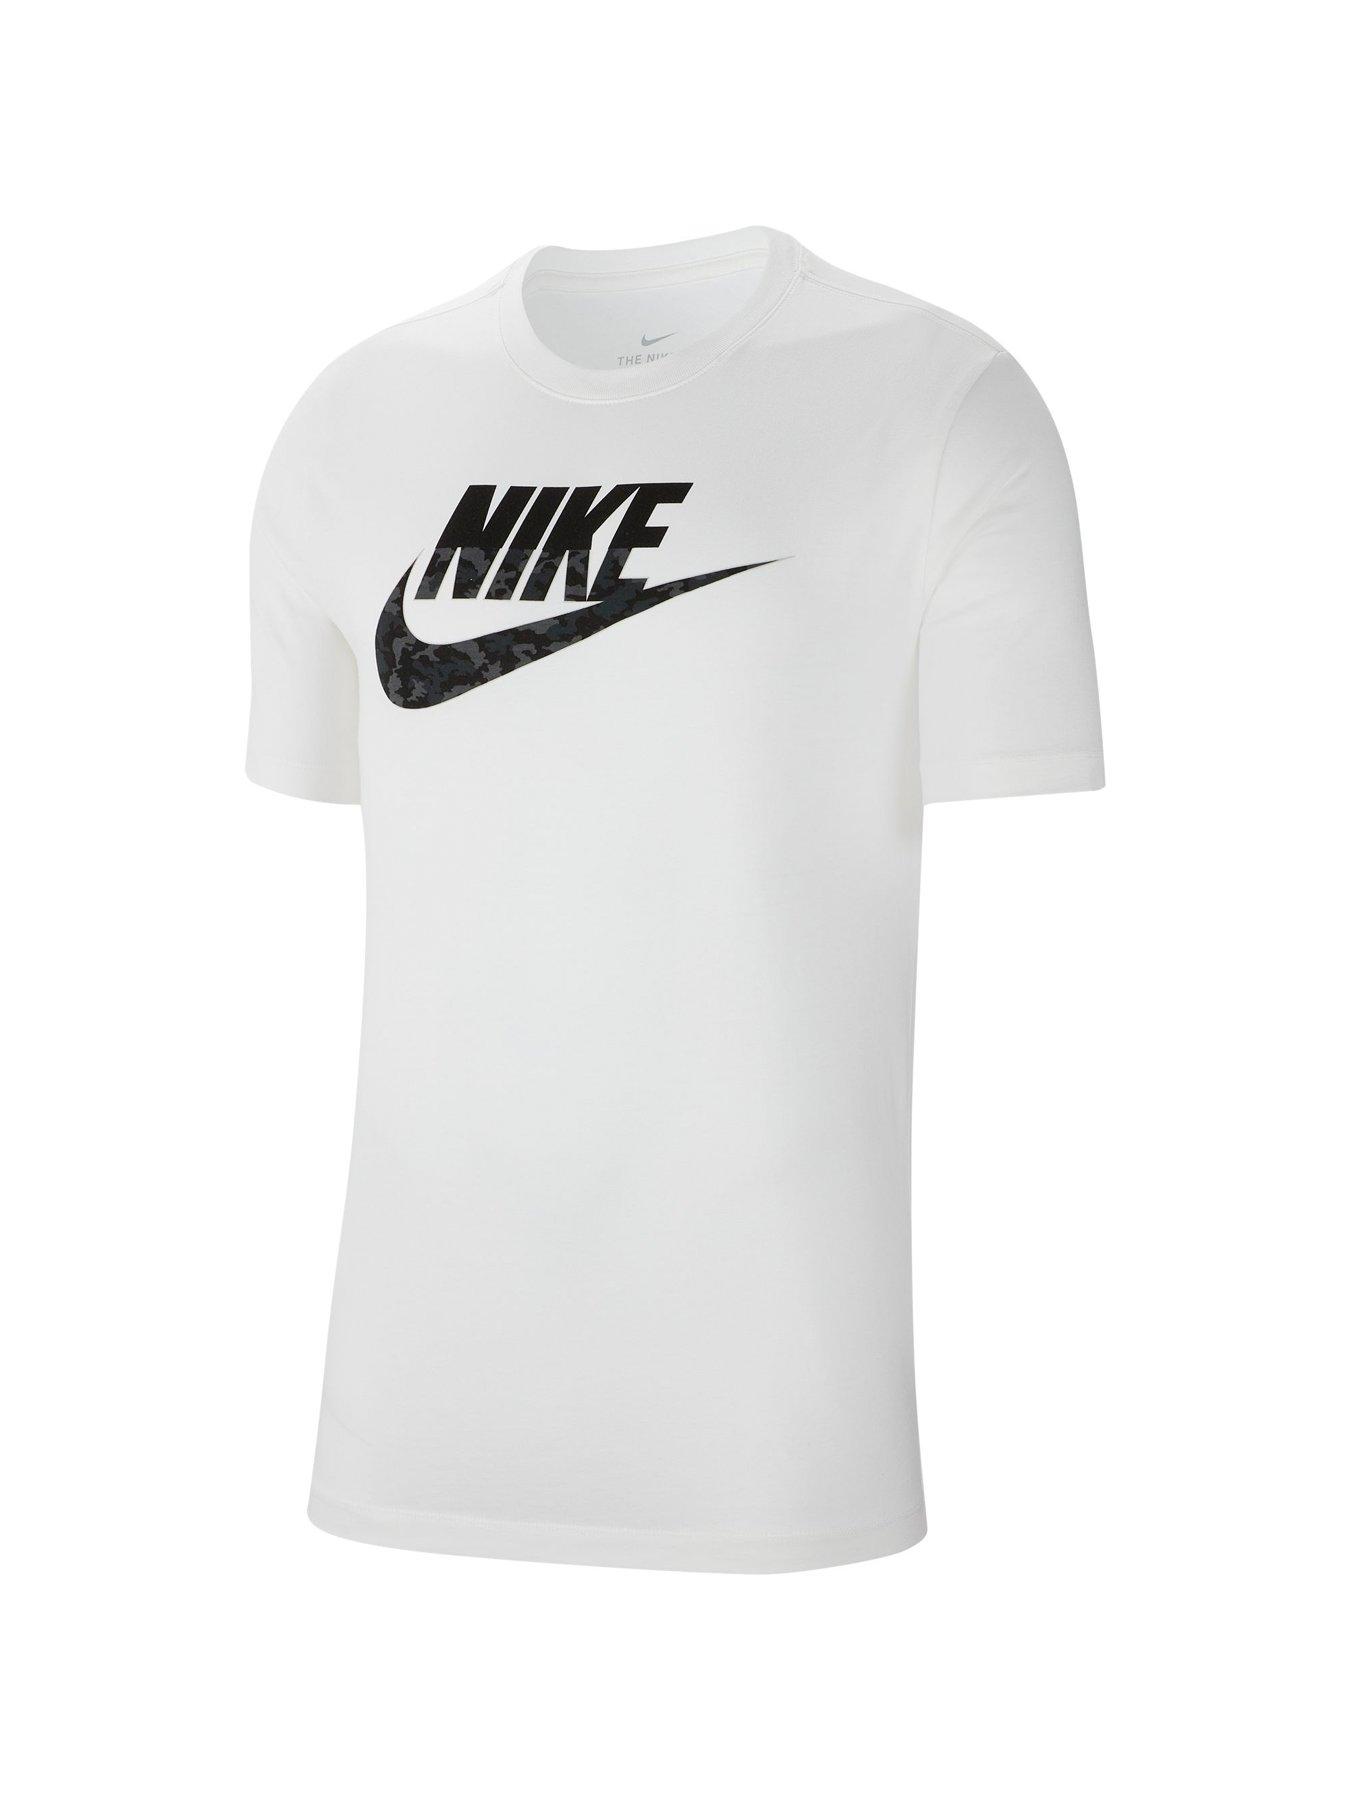 white nike top with black tick